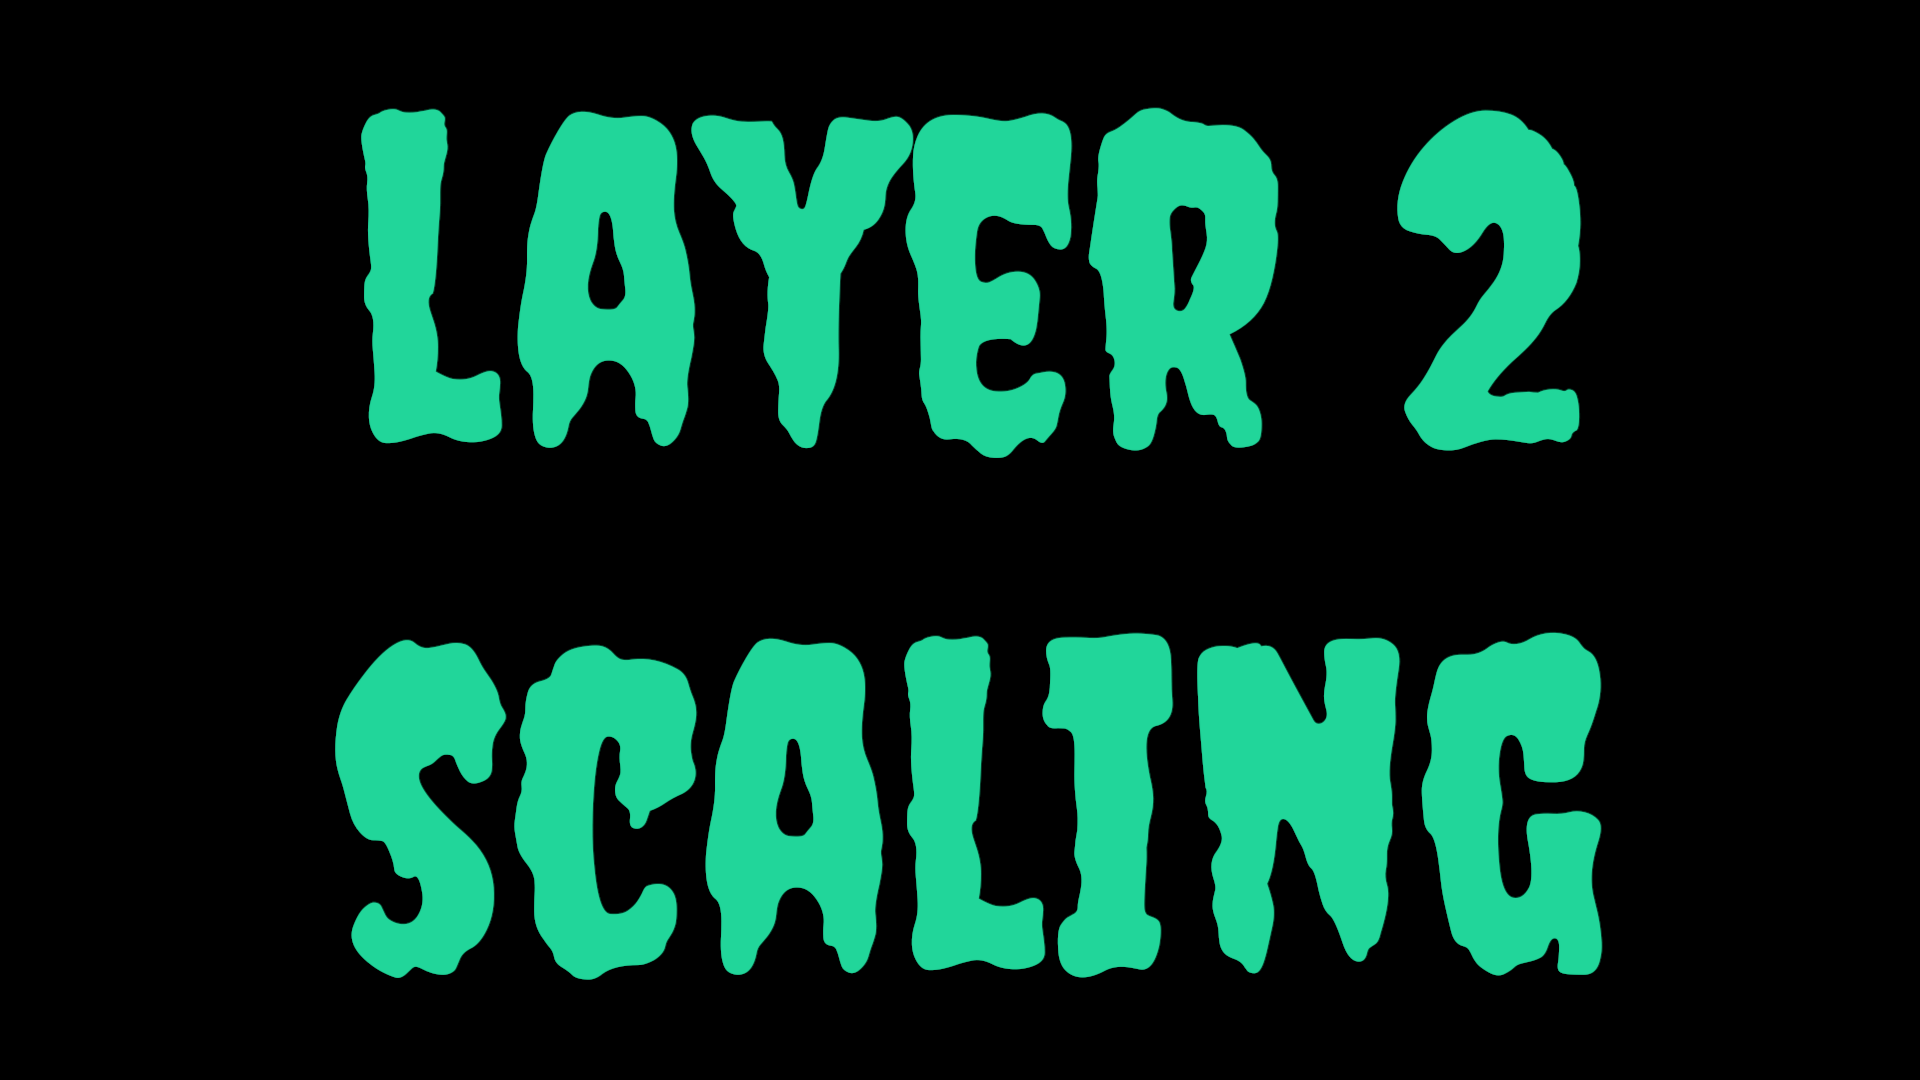 @cryptowingnut/layer-2-scaling